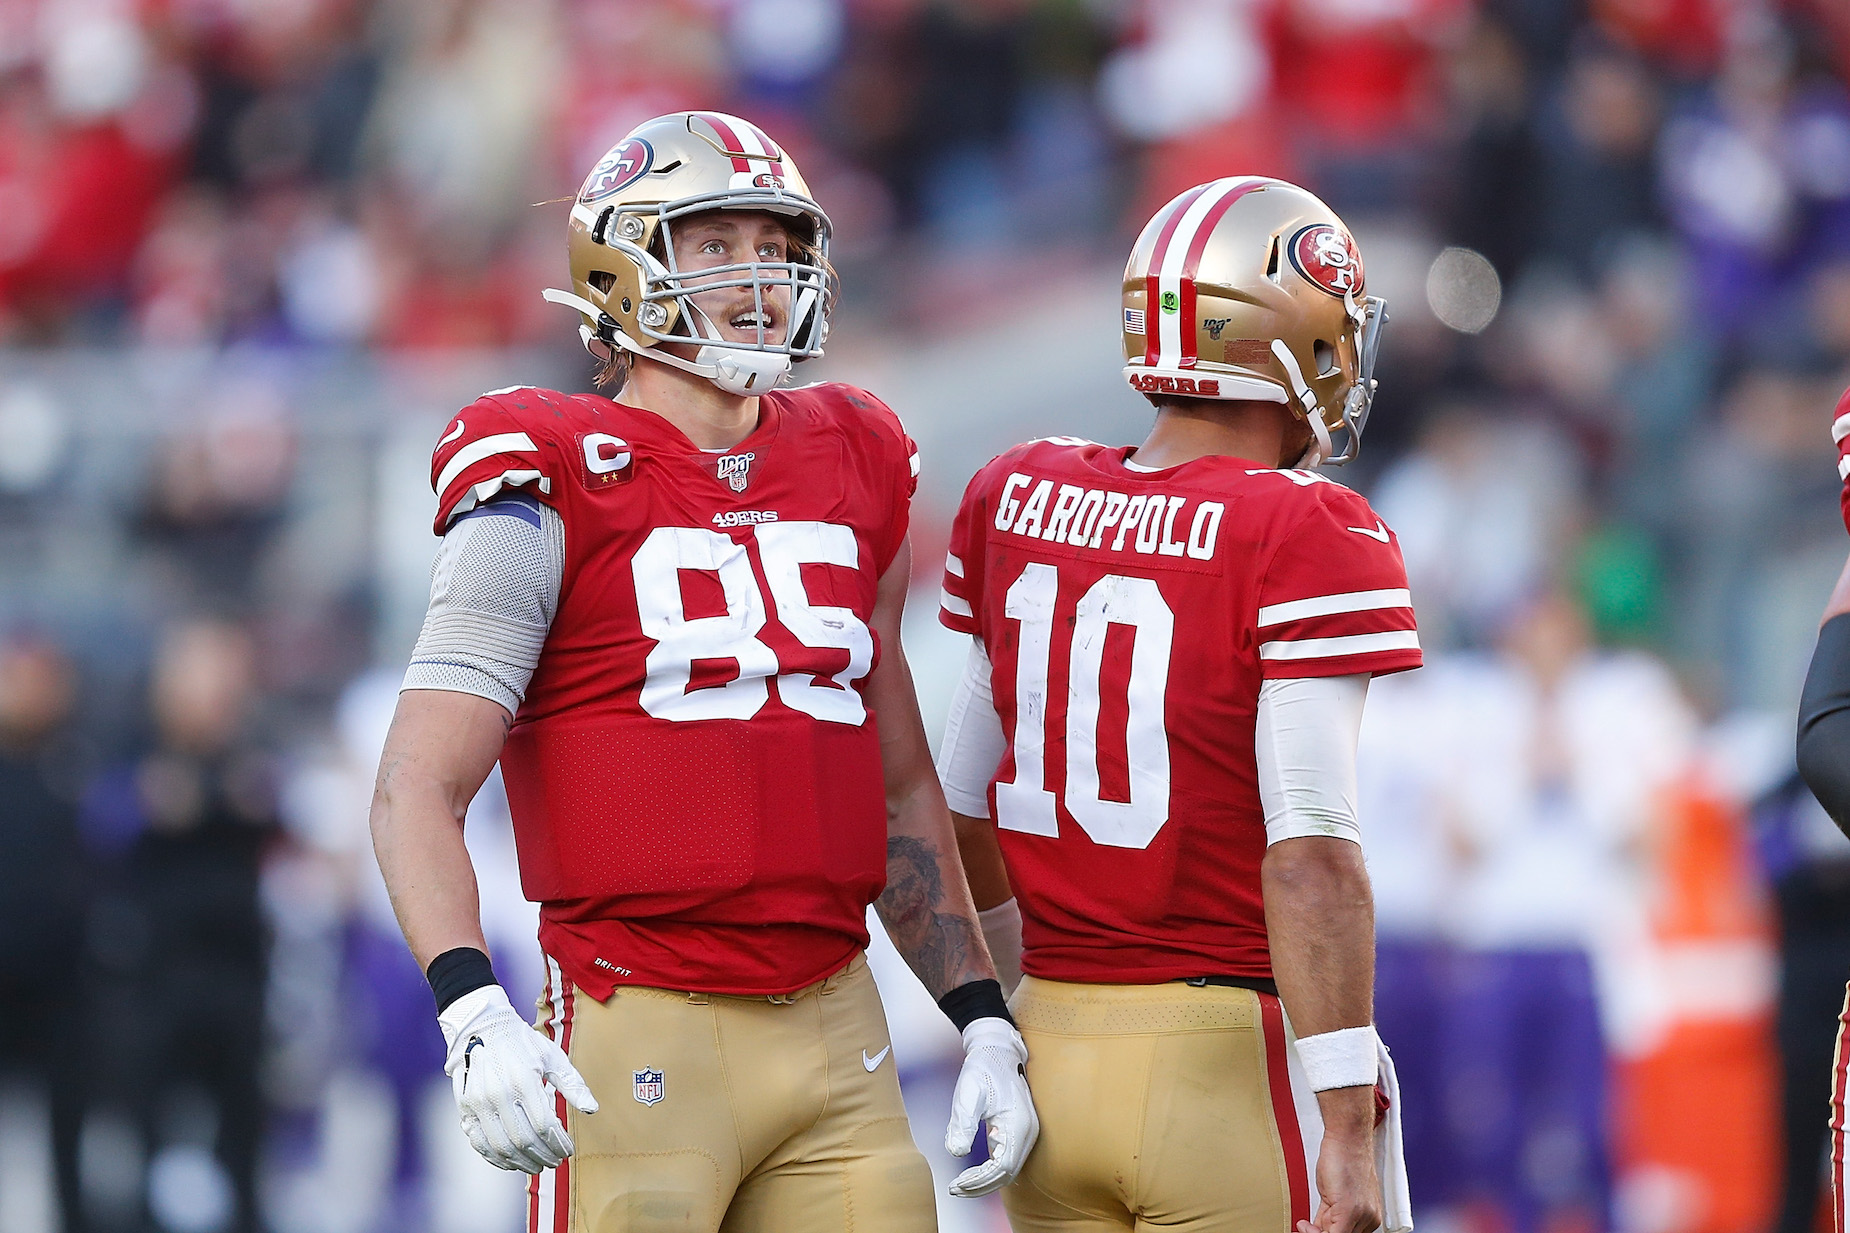 Neither Jimmy Garoppolo or George Kittle will be suiting up for Thursday's San Francisco 49ers game.